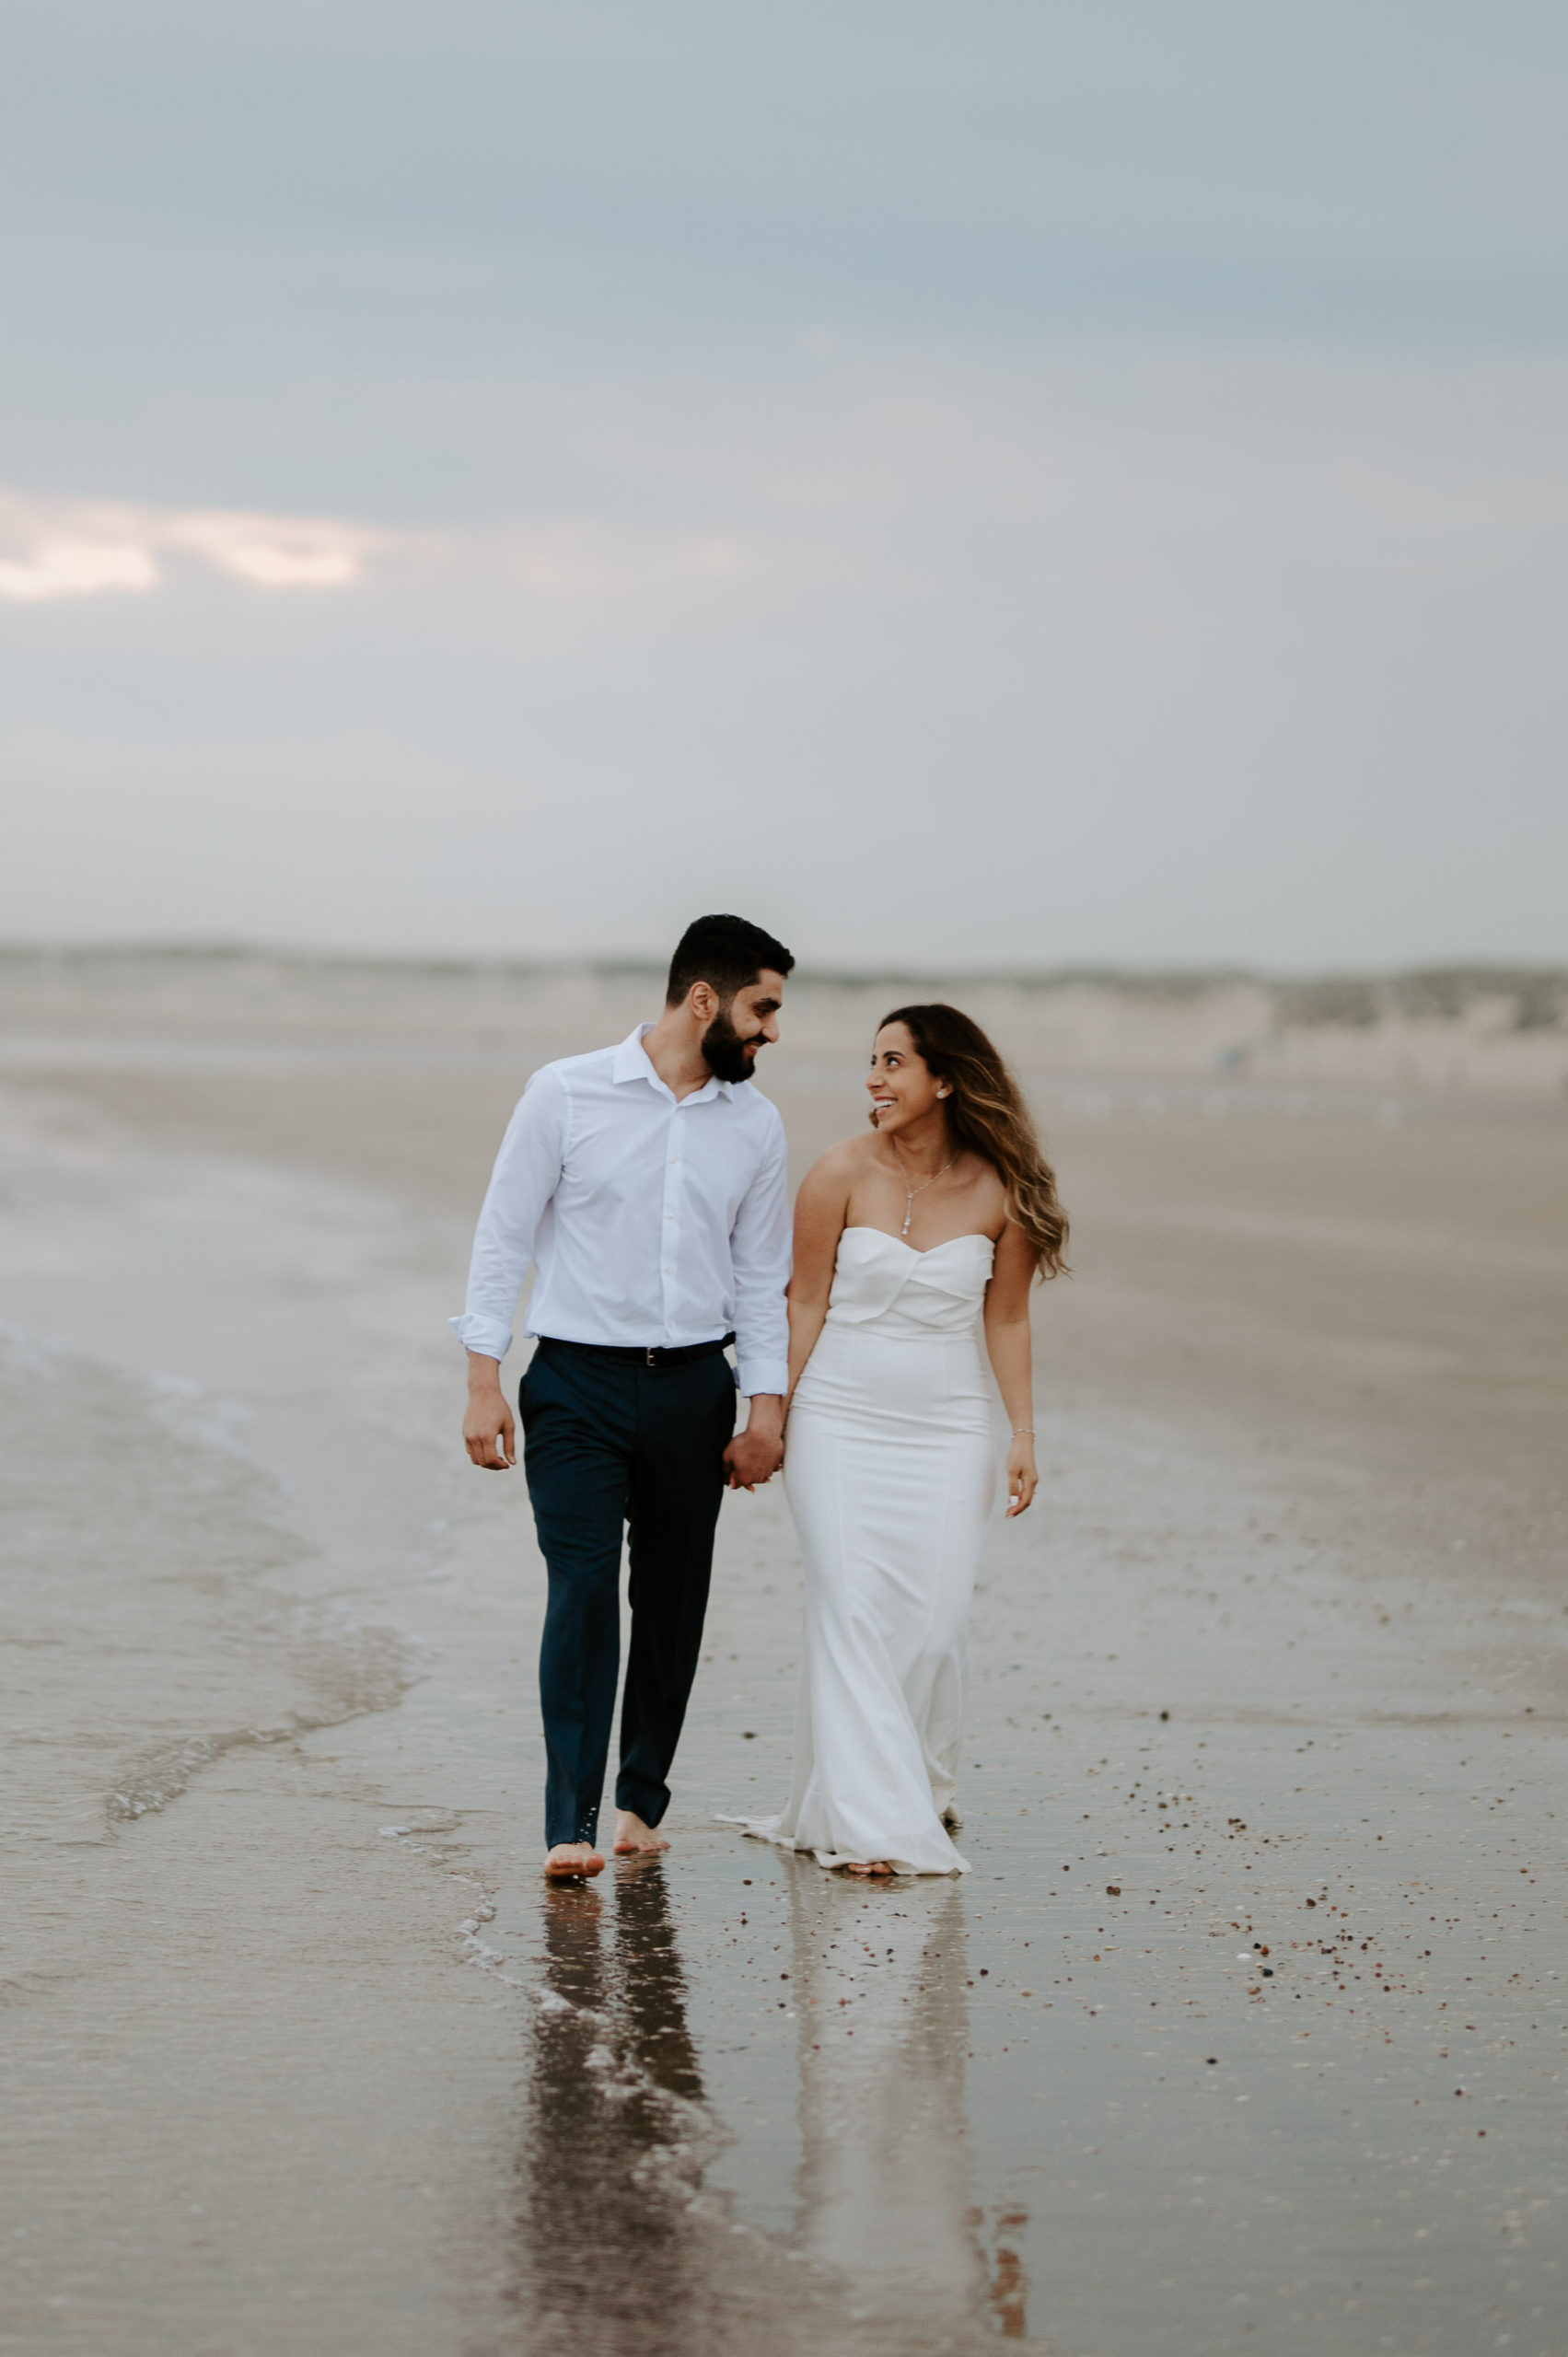 Demiana and Goergeuos - Camber Sands Golden Hour Beach Shoot - Laura Williams Photography-35.jpg